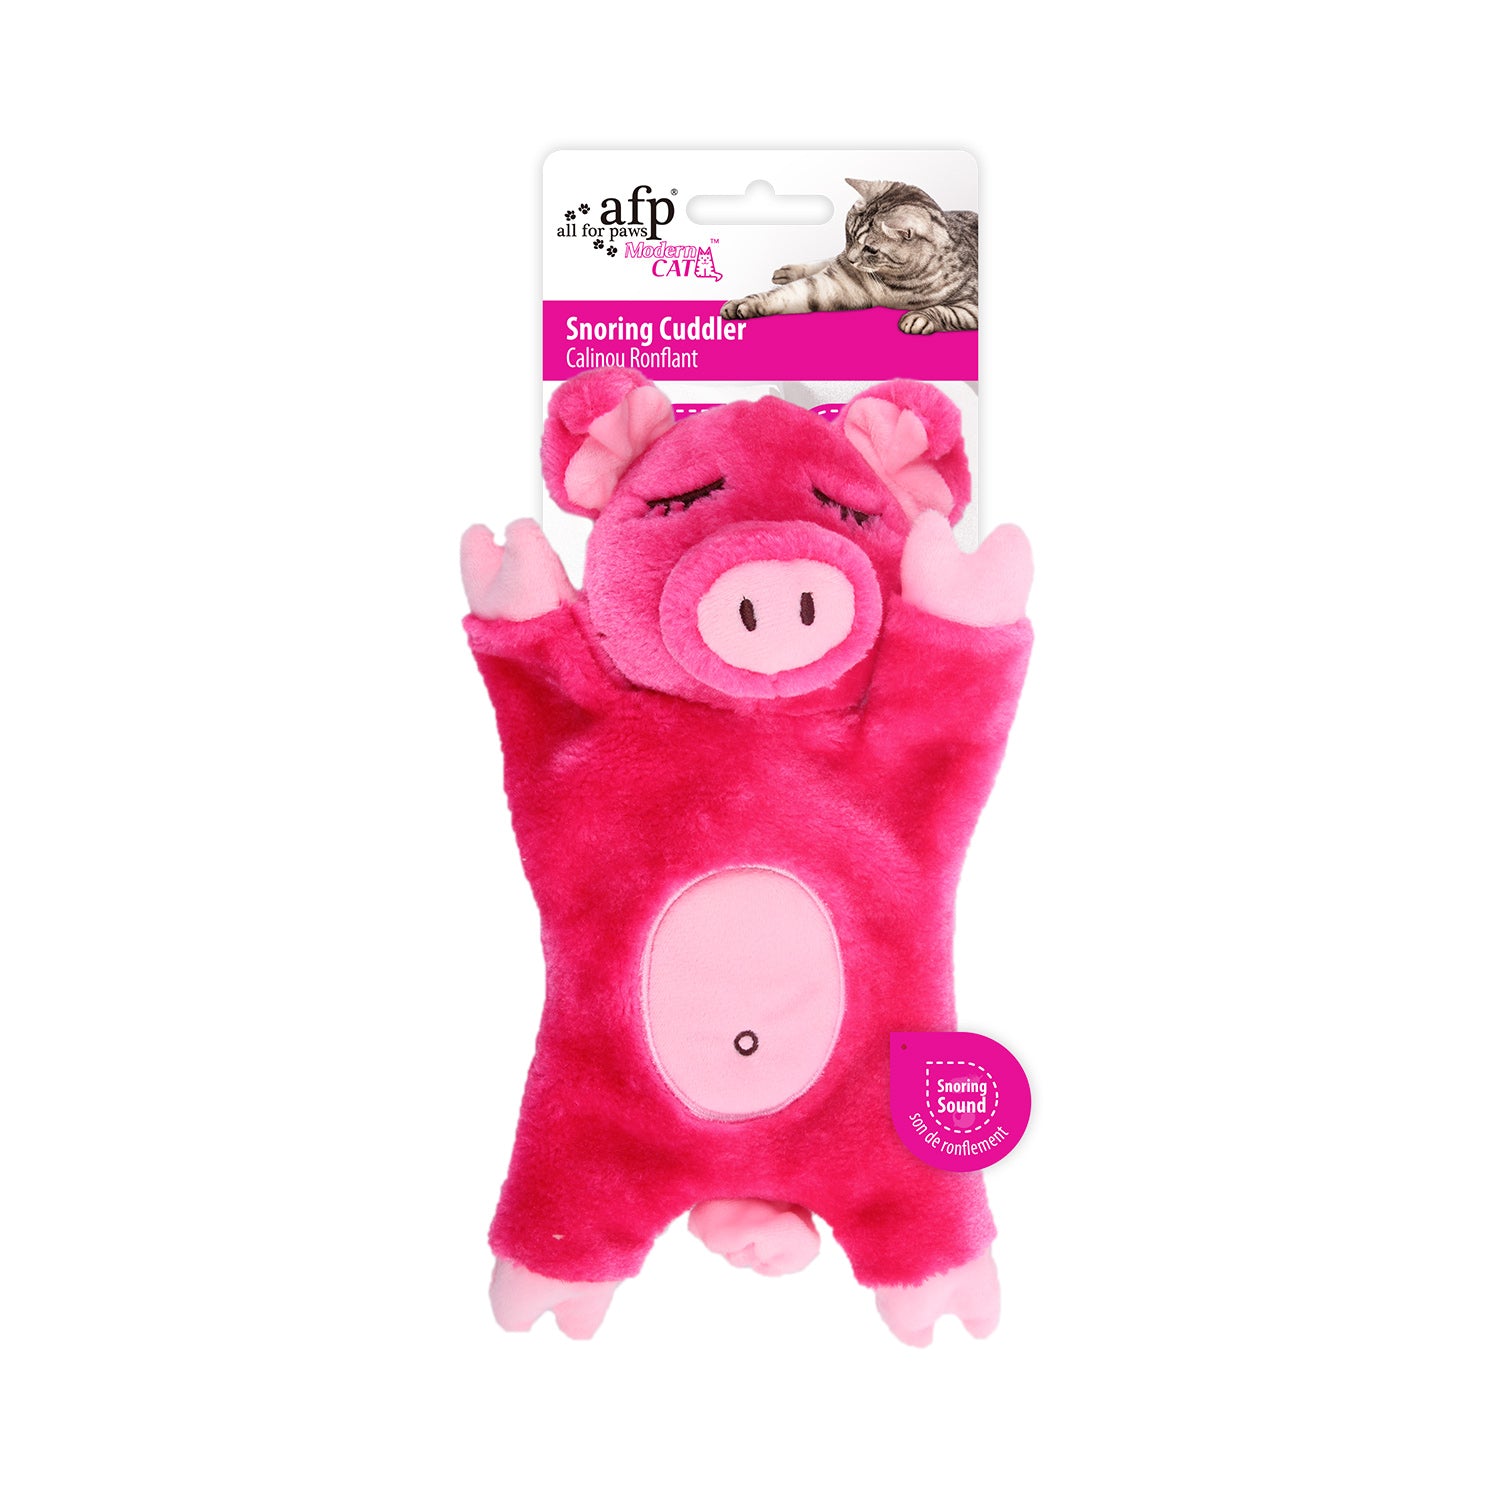 All for Paws Cat Snoring Cuddler Pig, Calming Cat Snuggle Toys, Cat Anxiety Toy Comfort Your Kittens